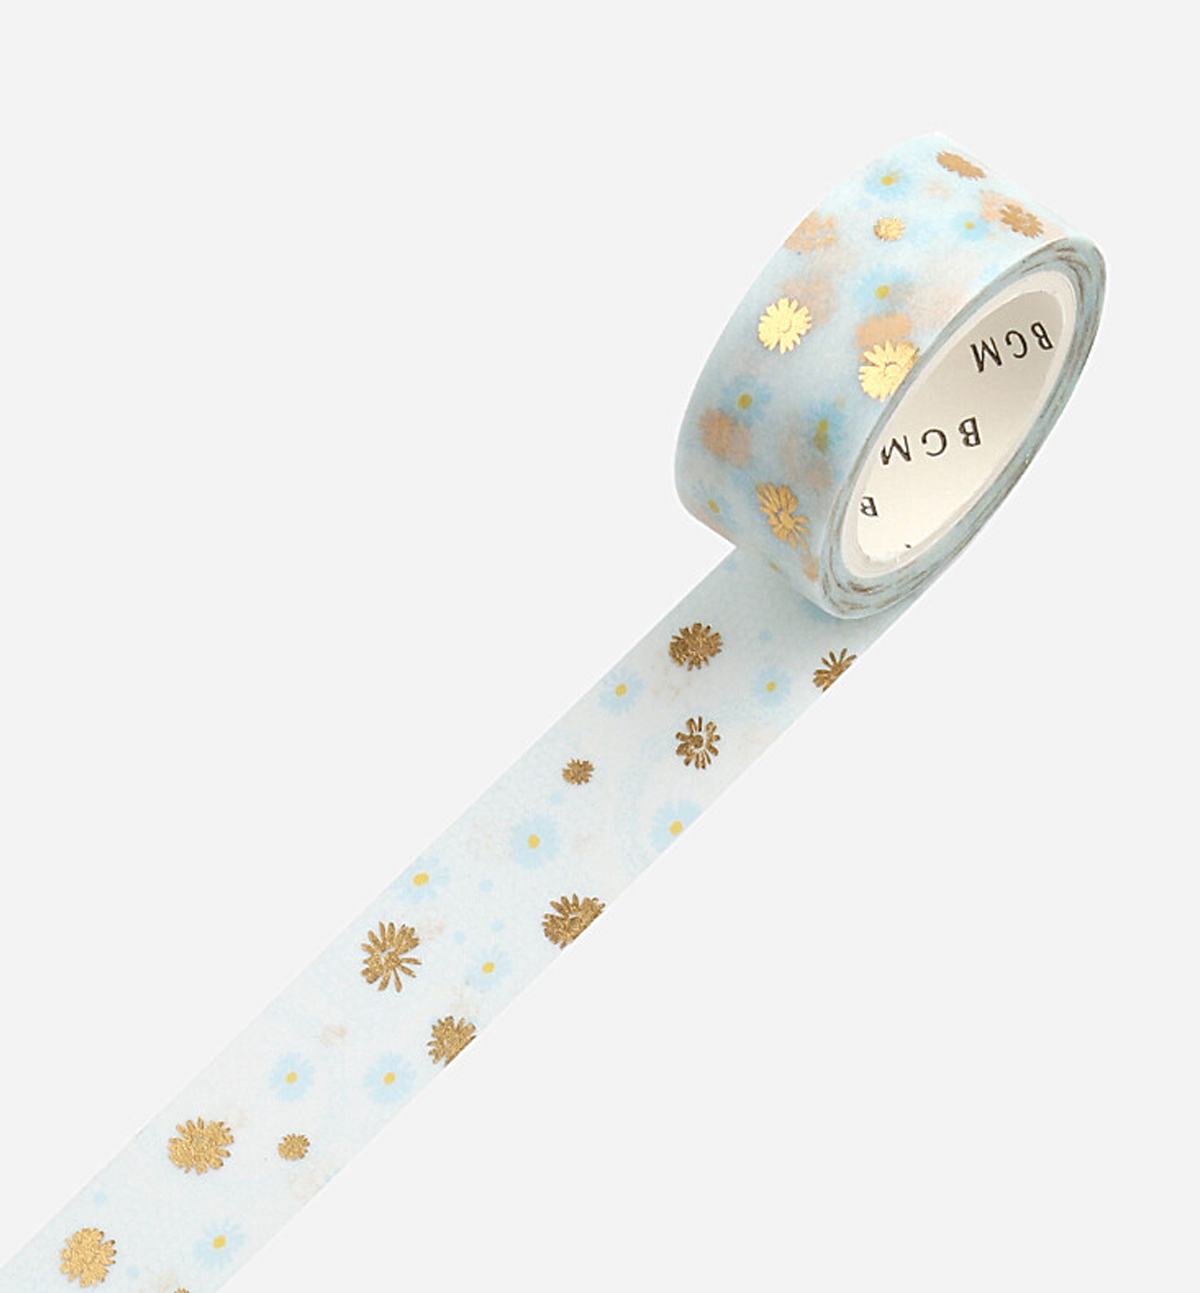 Life Check Daisy Washi Tape [Foil Stamping]